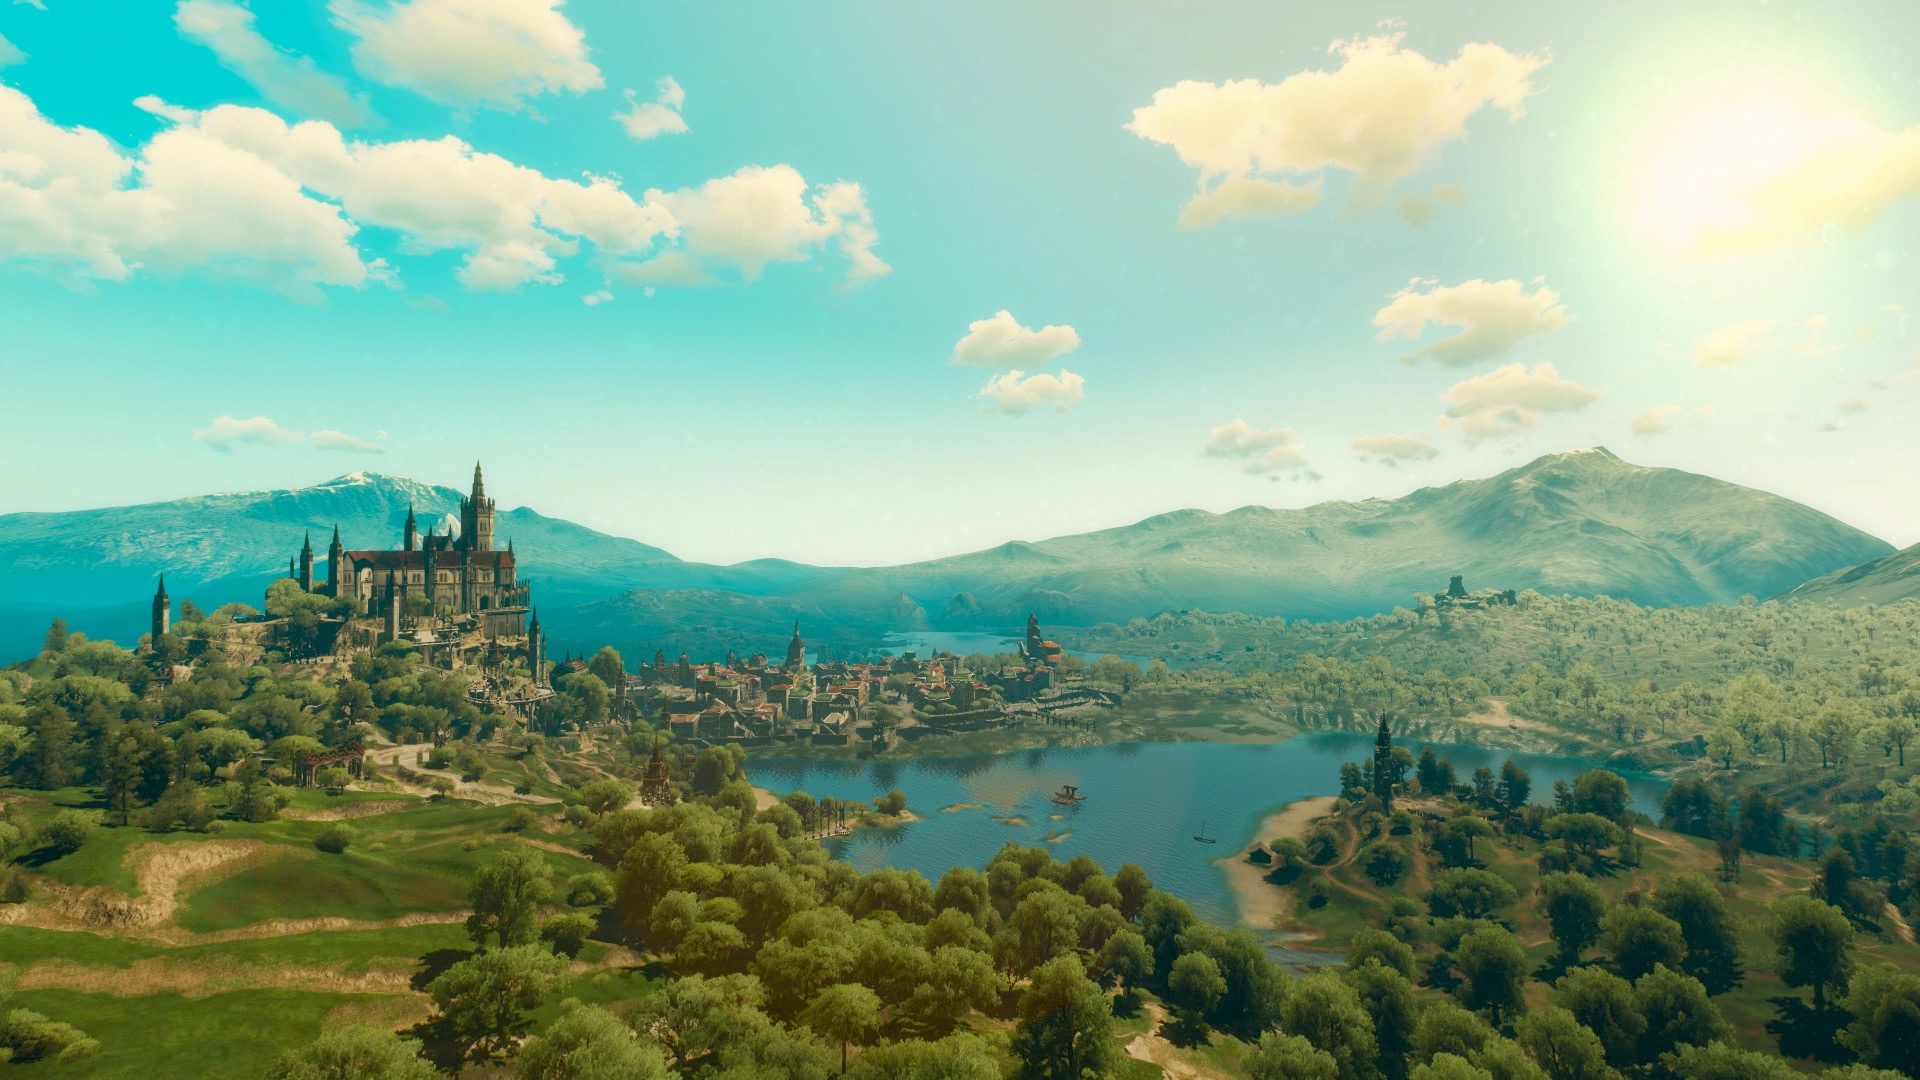 A screenshot of The Witcher 3: Blood and Wine, showing a castle in a verdant landscape